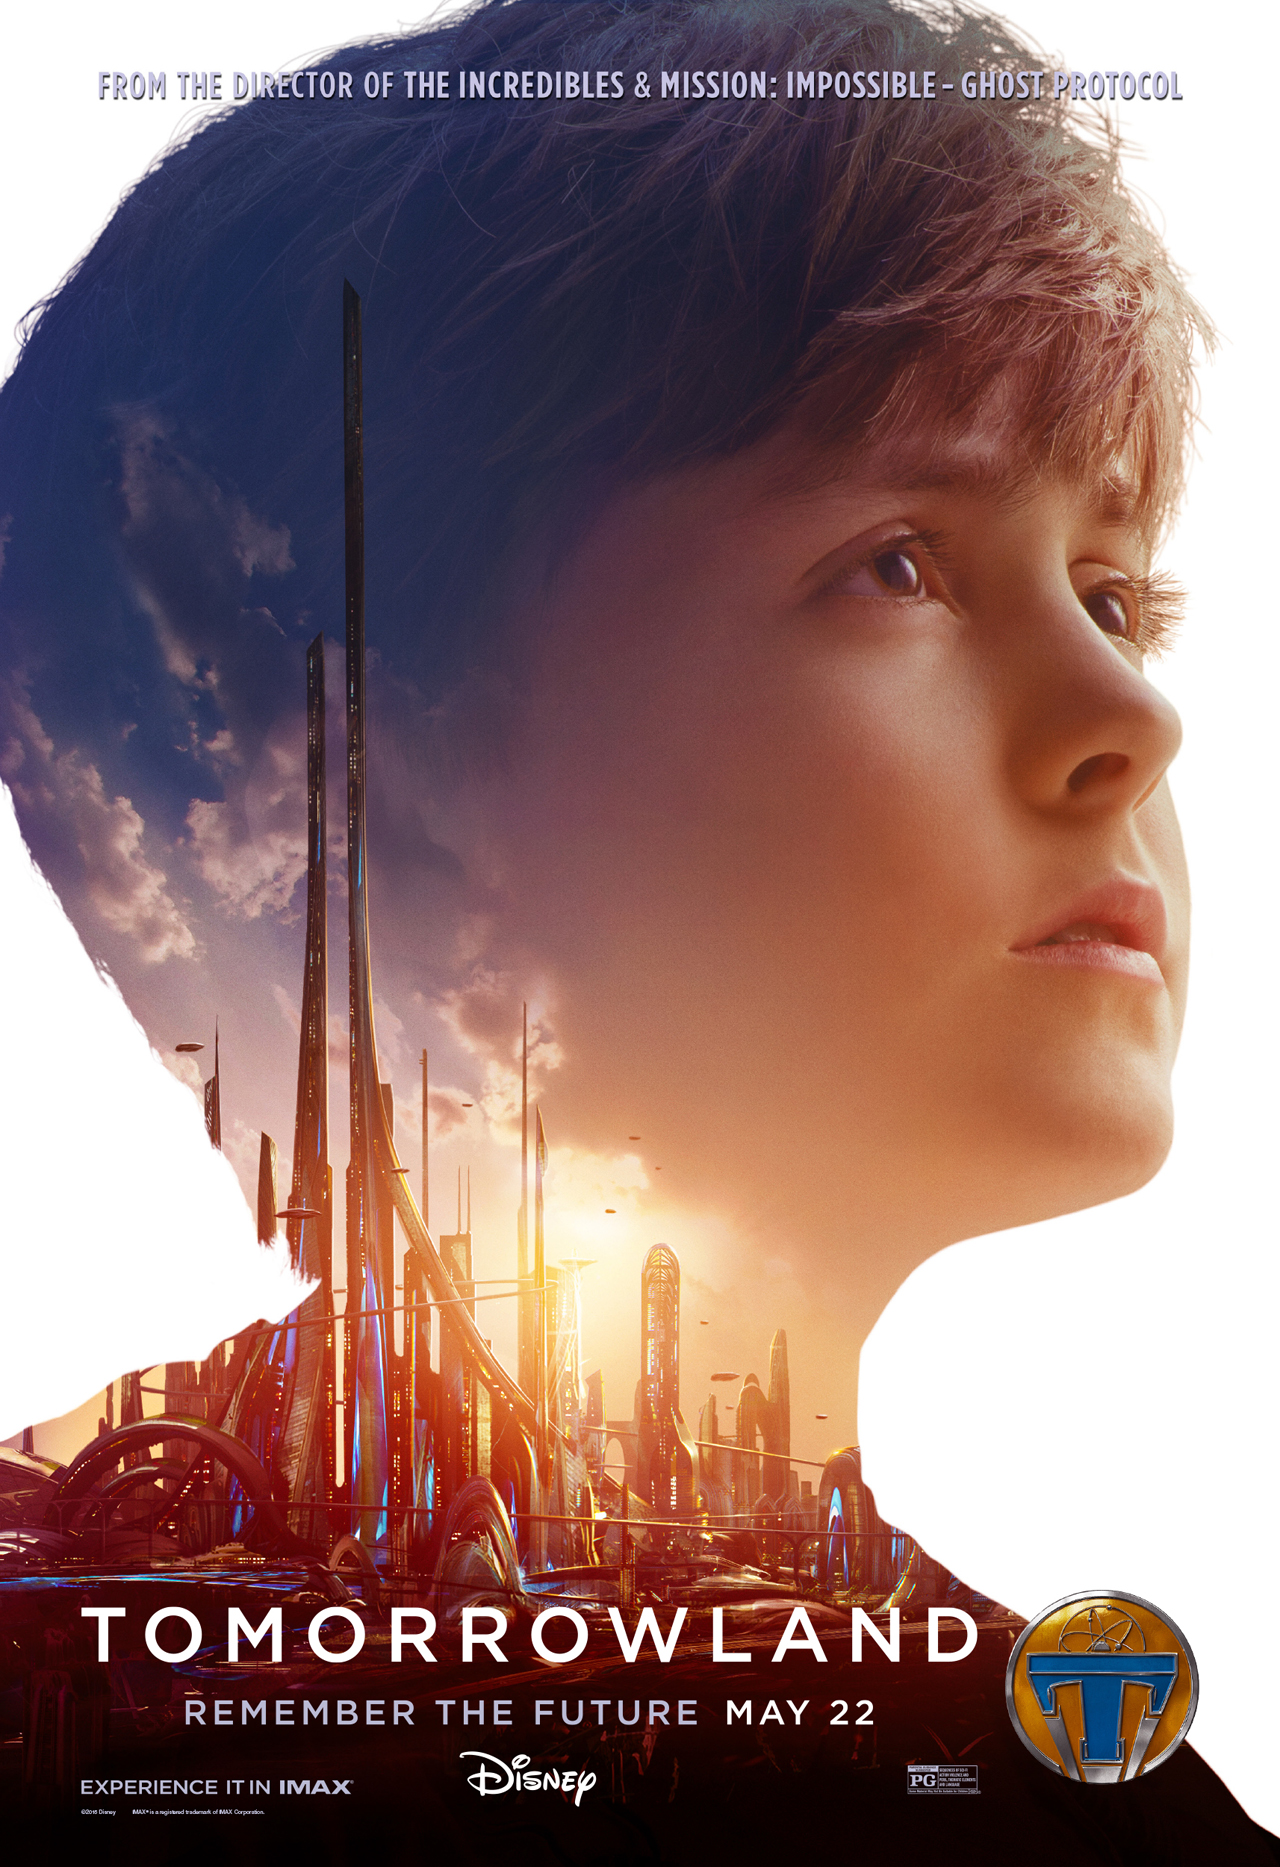 Tomorrowland Young Frank character poster